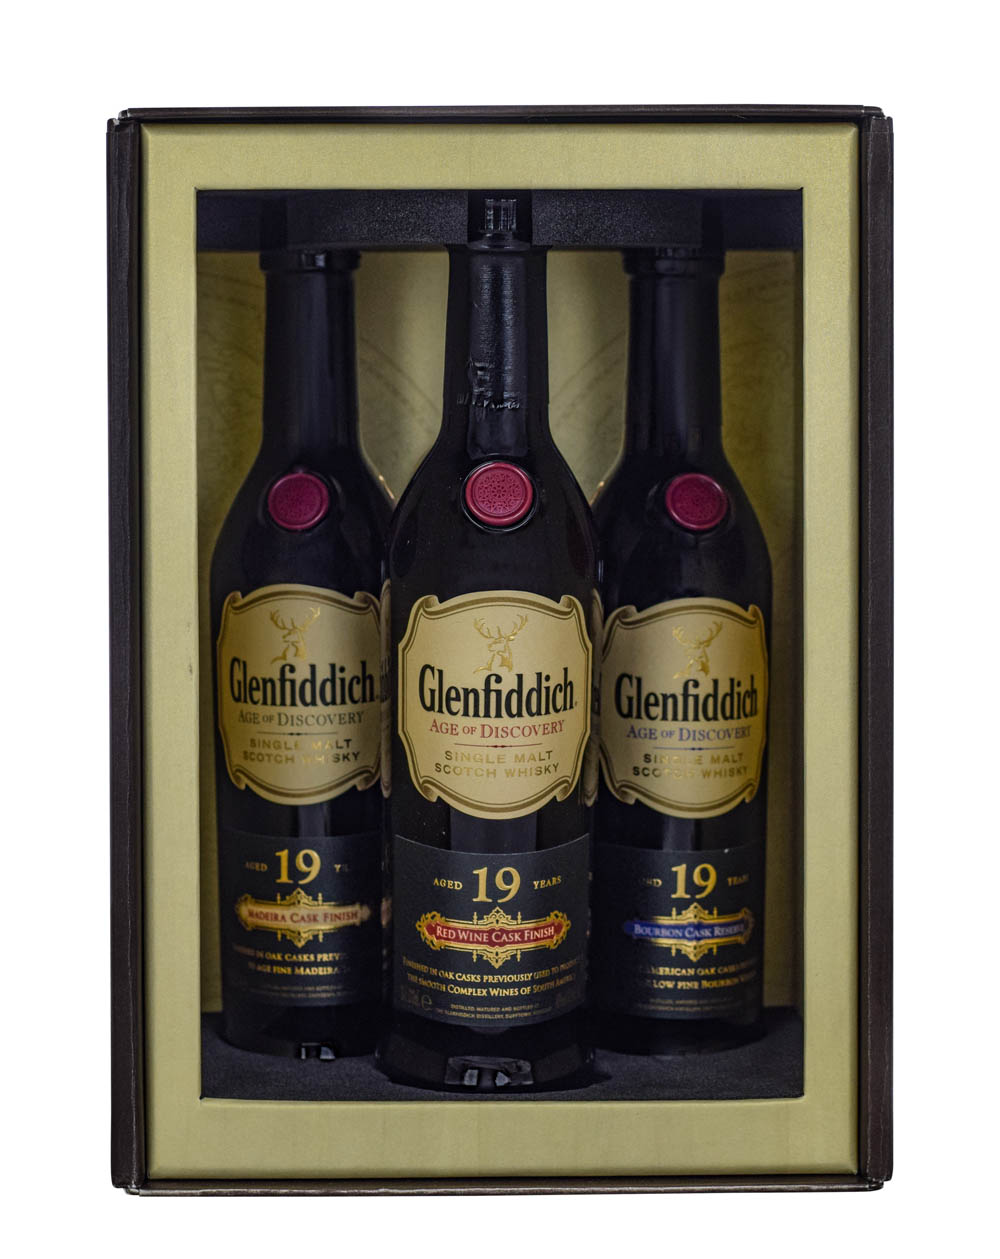 Glenfiddich Age of Discovery Collection Inside Musthave Malts MHM